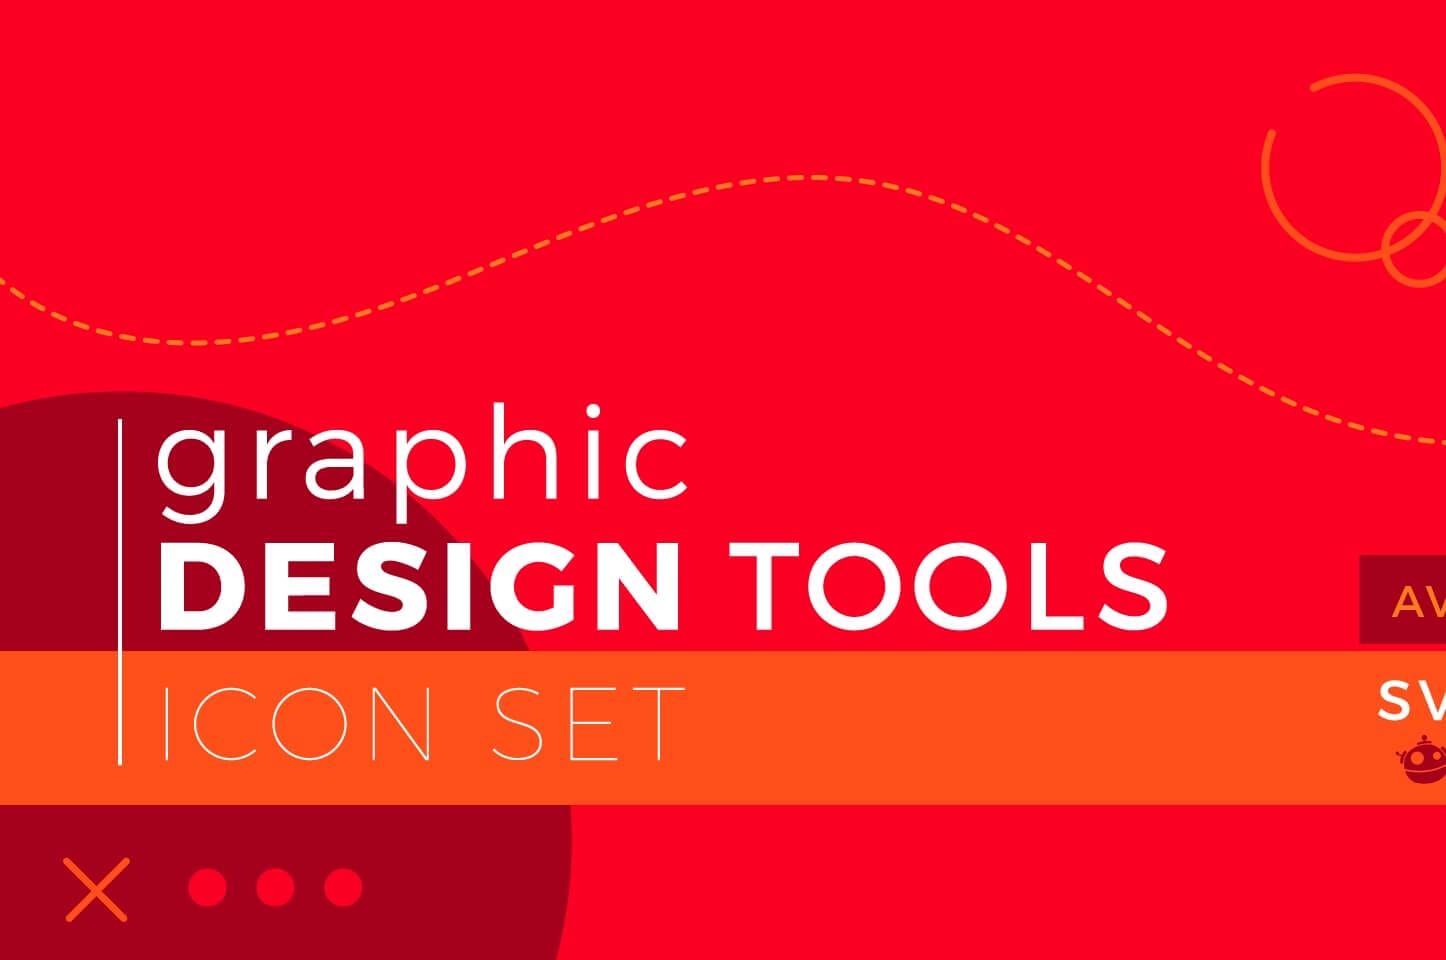 Free Download: 100 Graphic Design Tools Icons